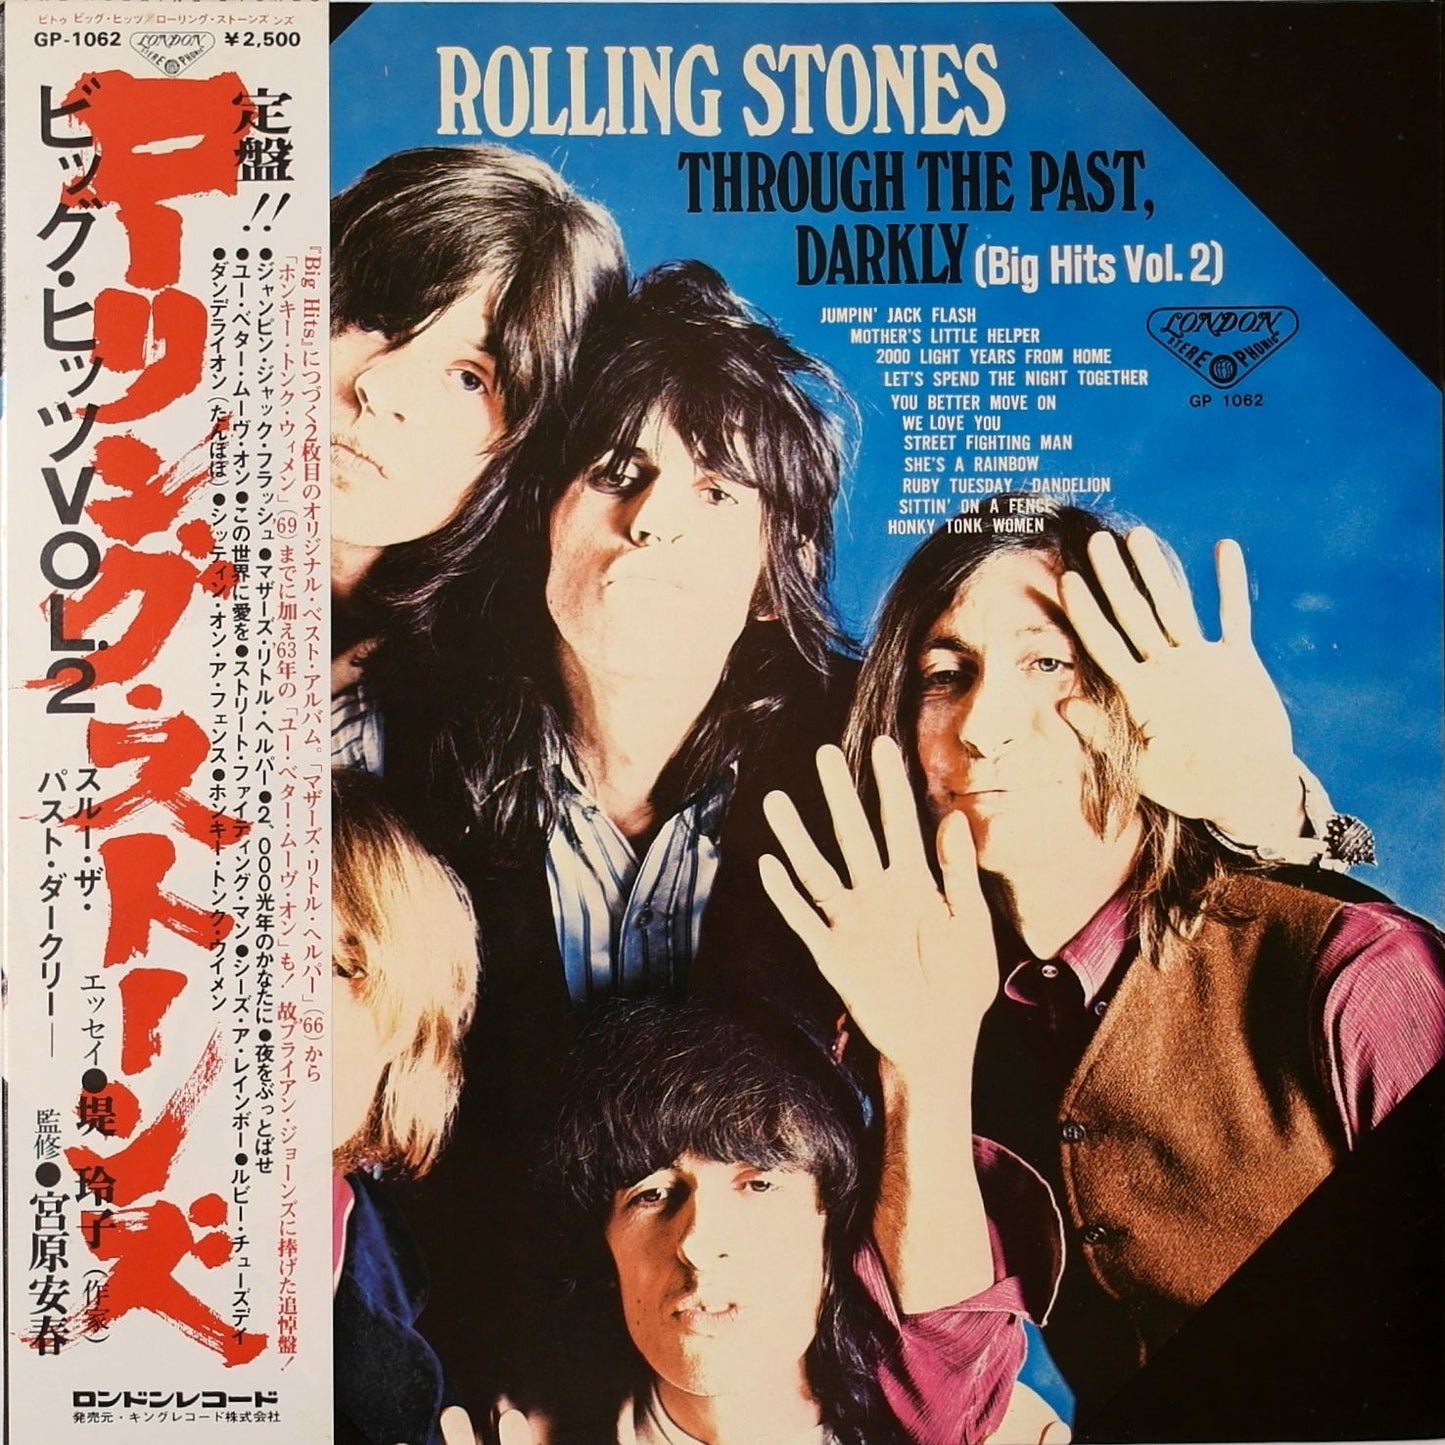 THE ROLLING STONES - Through The Past, Darkly (Big Hits Vol. 2)